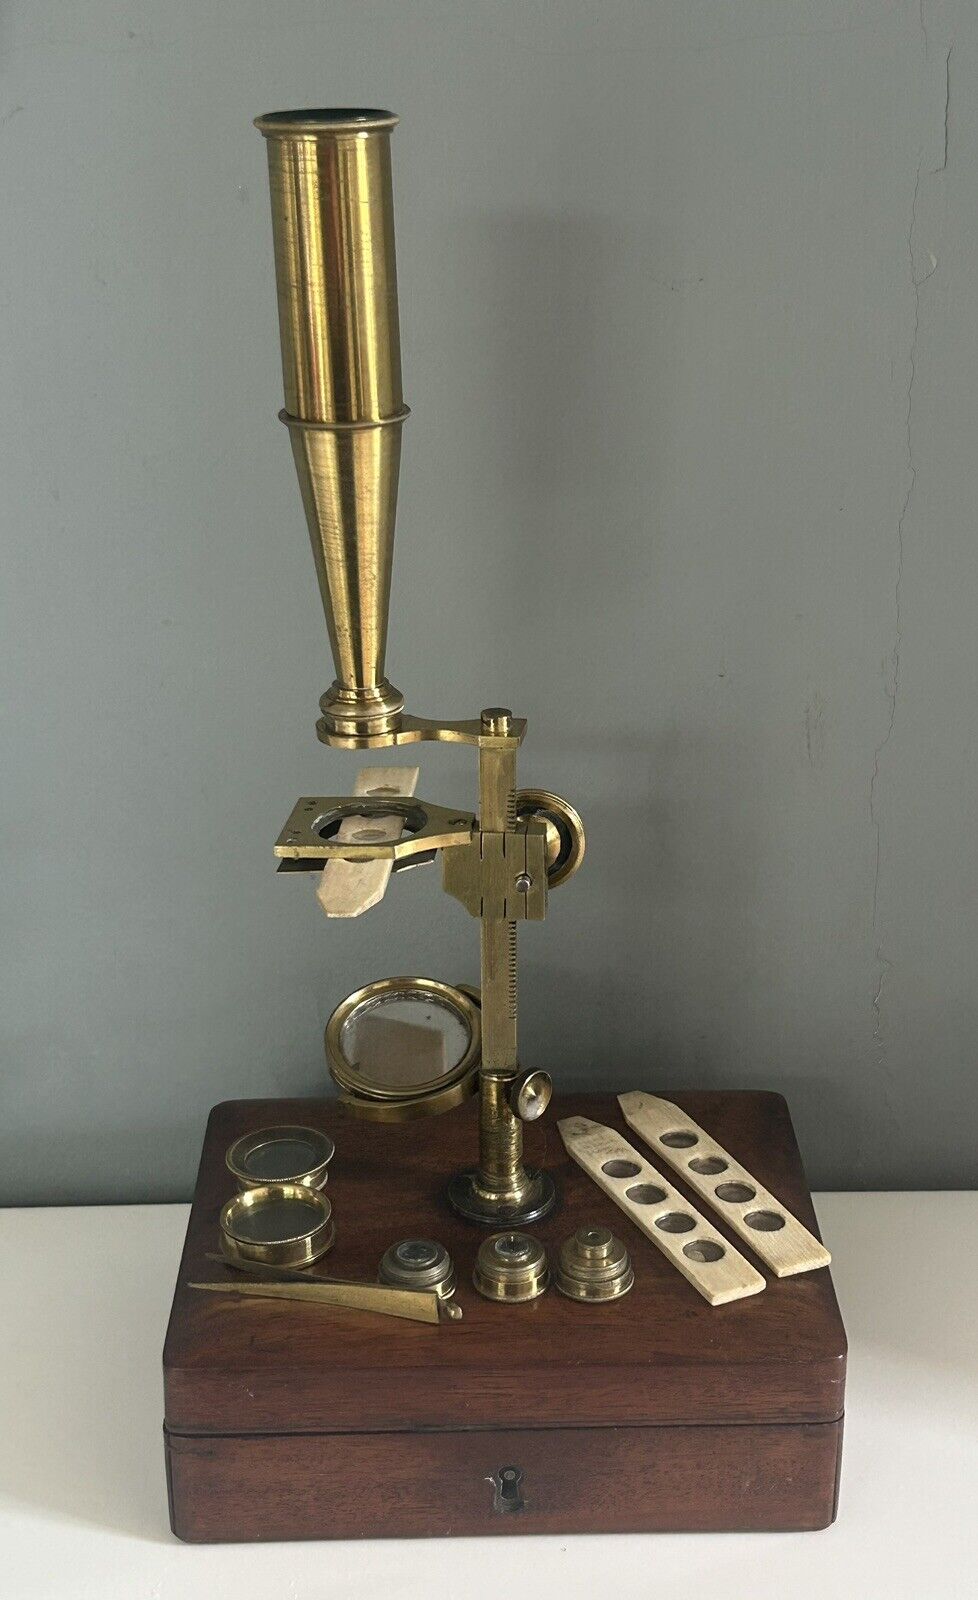 Fine Antique Cary-Gould Type Box Mounted Microscope. Circa 1820